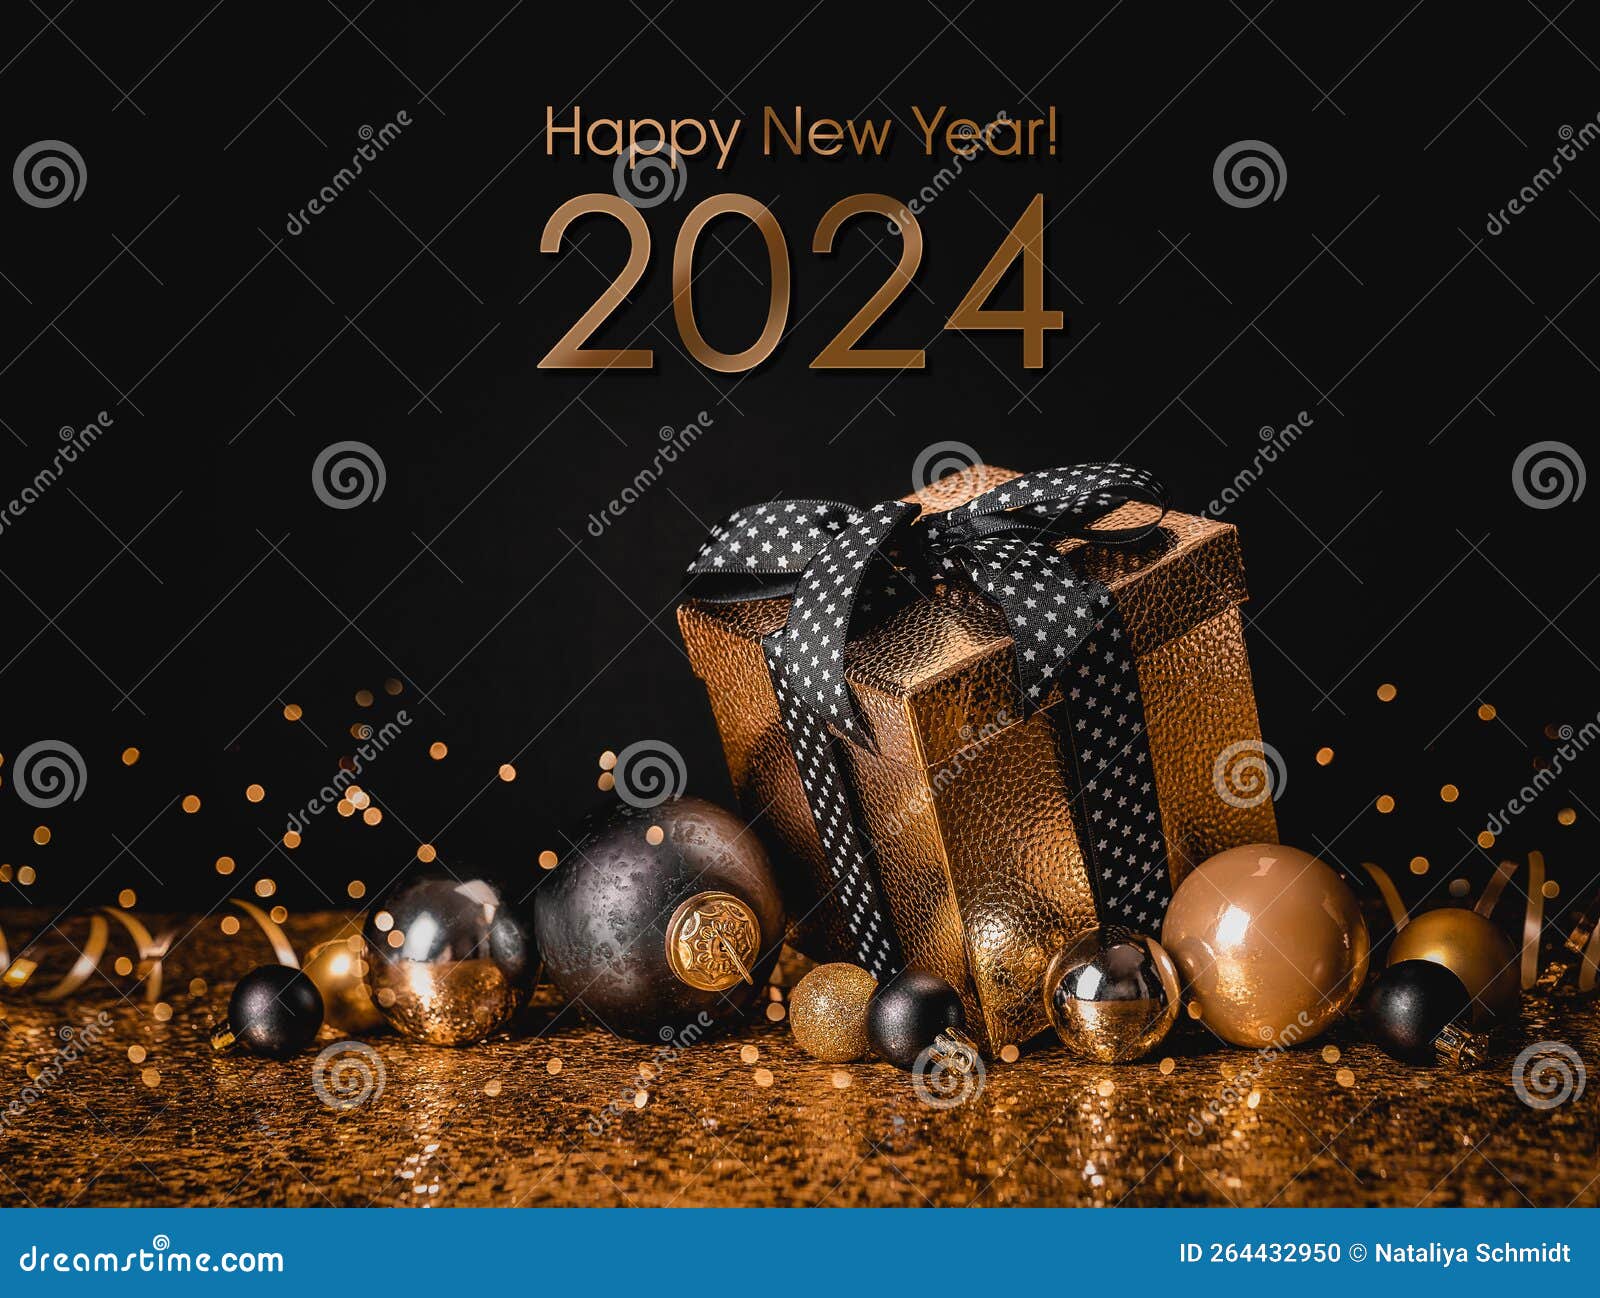 New Year 2024: Five meaningful gifts for your loved ones – India TV